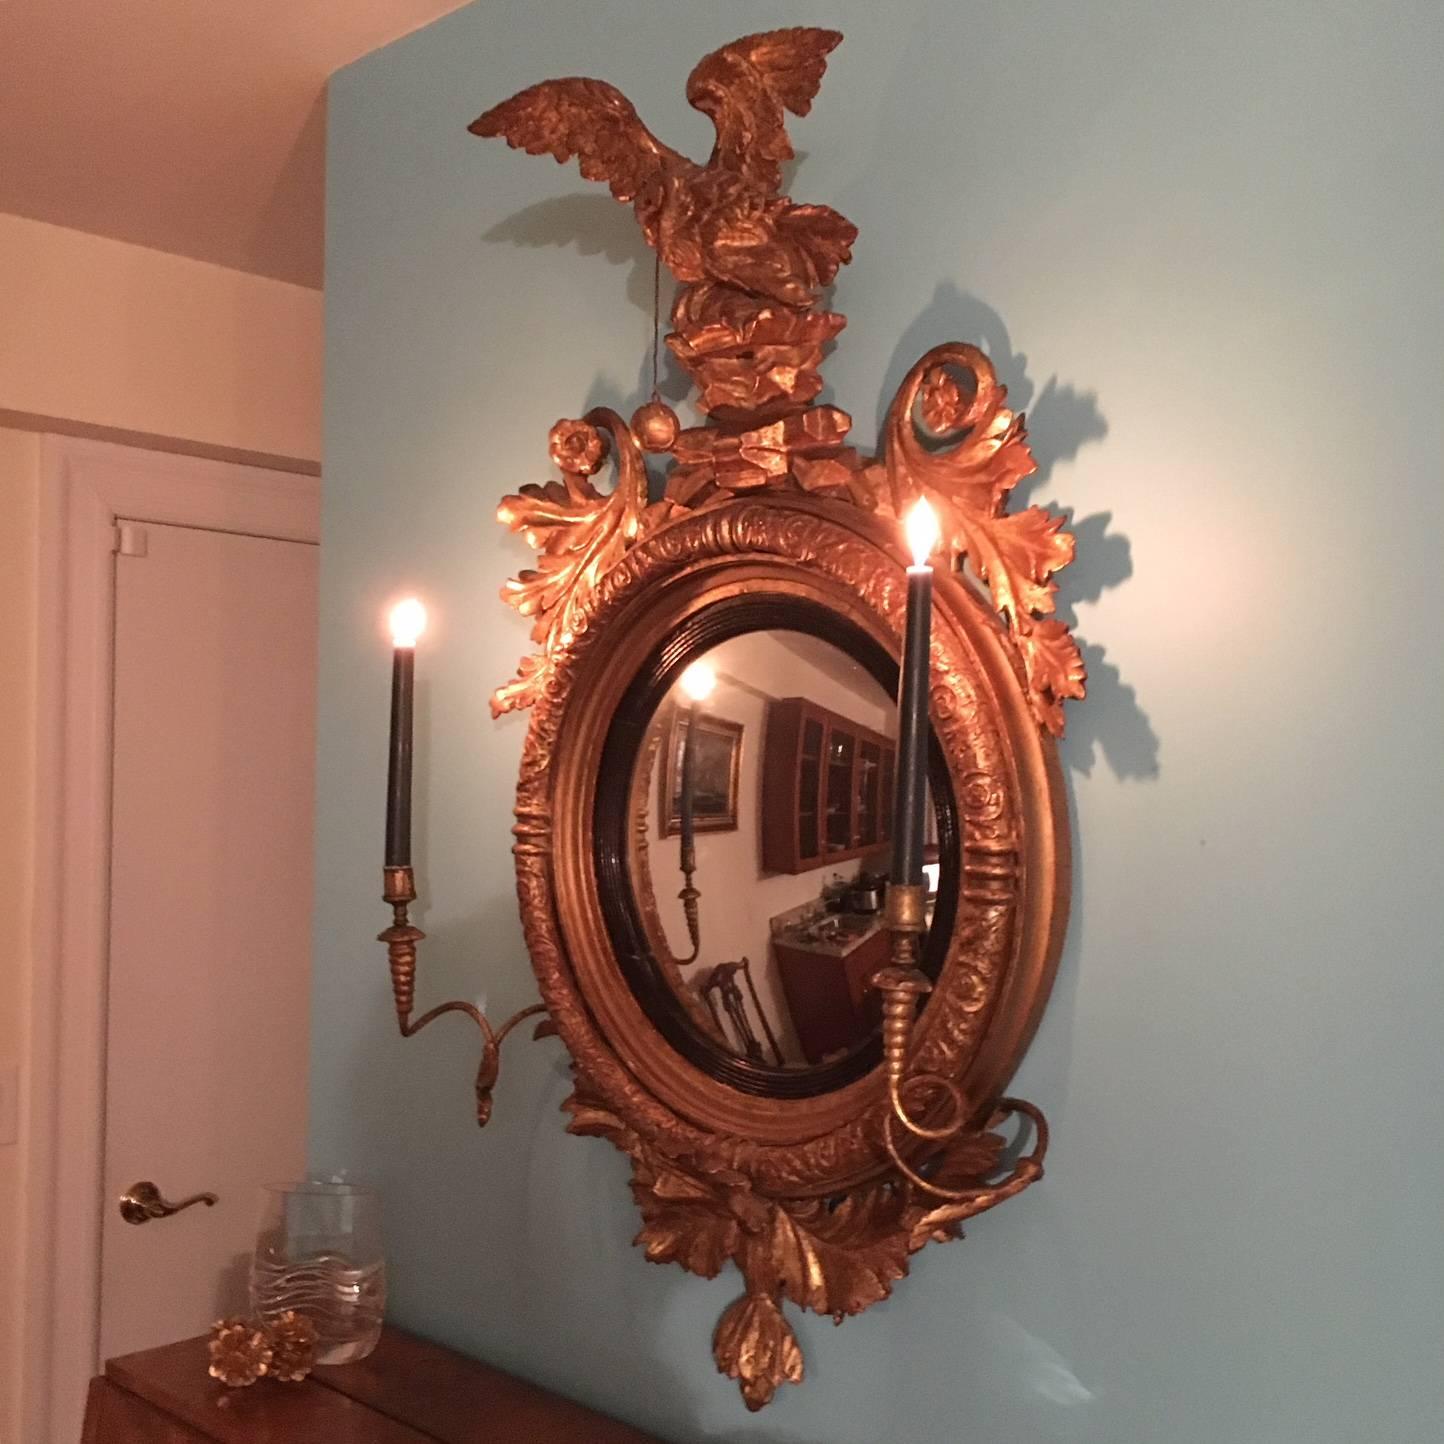 Glorious late 18th or early 19th century giltwood and gesso girandole Regency (possibly Federal) mirror, with convex mirror framed by ebonized reed and two candle brackets. Beautiful carved frame. This exquisite round wall mirror is topped with a